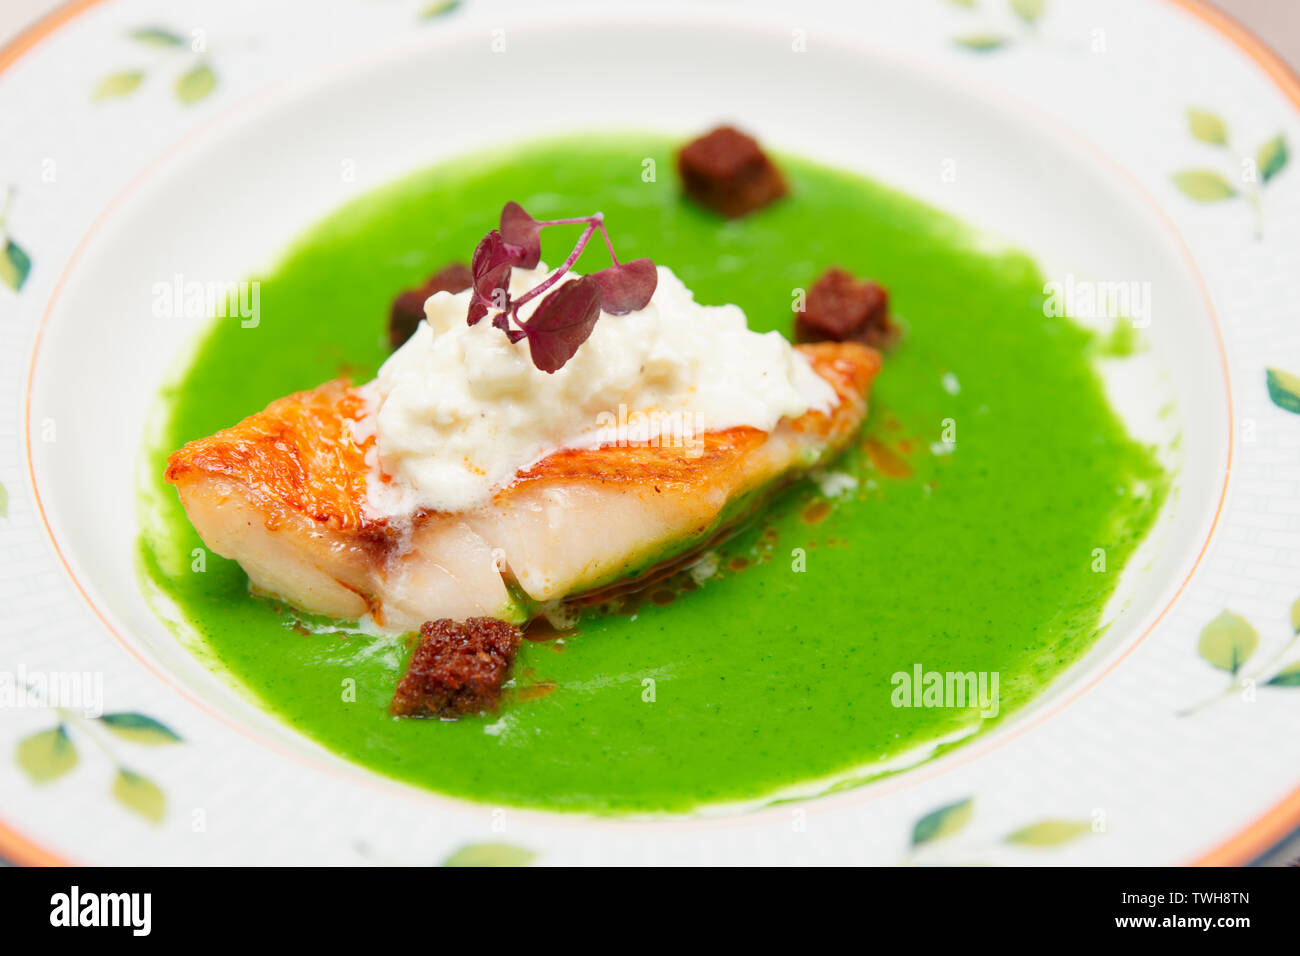 Seabass with herbs and spinach puree in plate, close-up Stock Photo